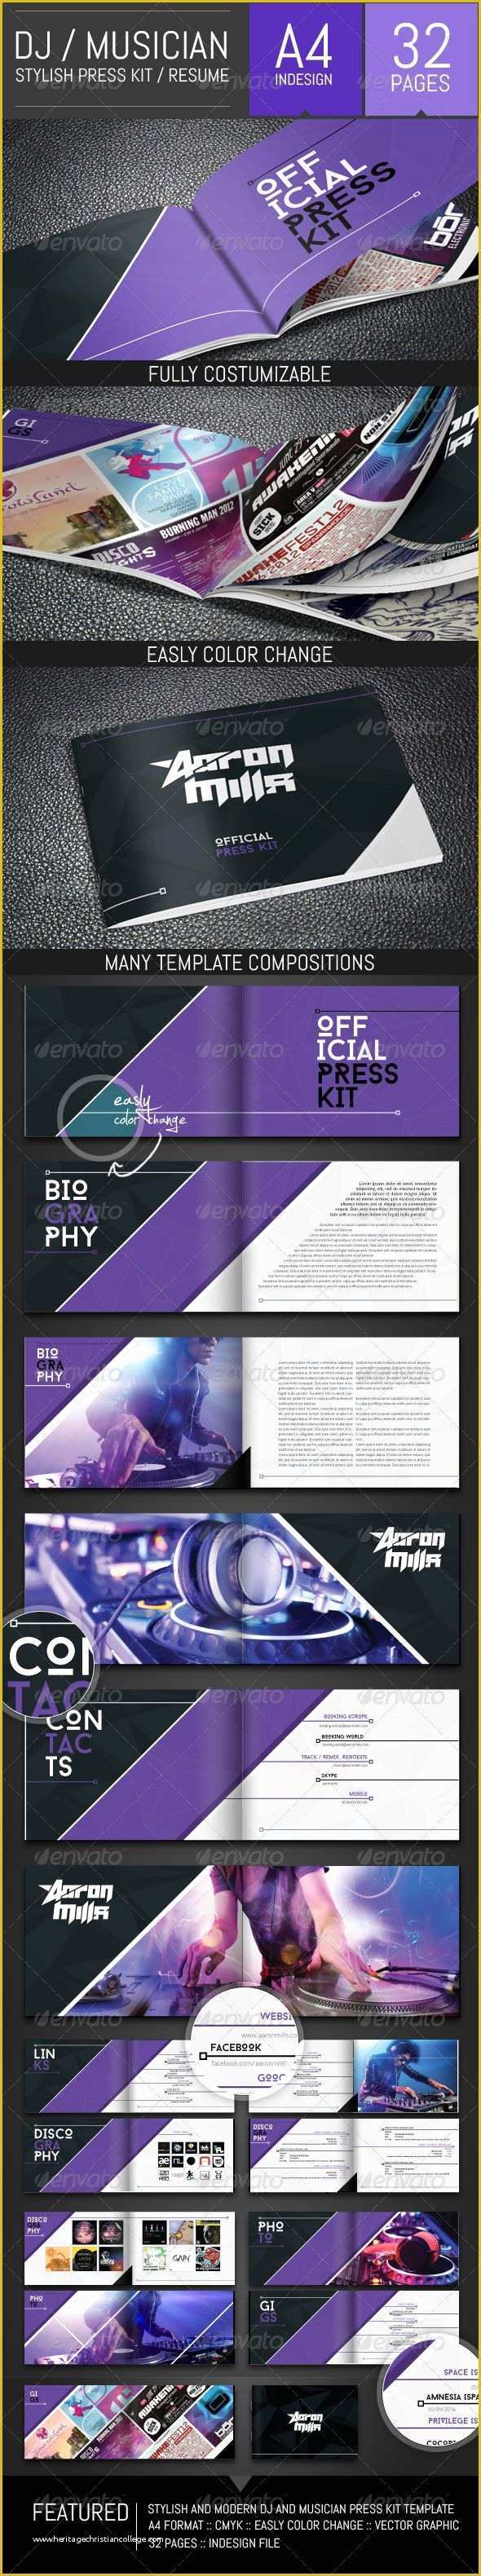 Musician Press Kit Template Free Of 17 Best Ideas About Press Kits On Pinterest